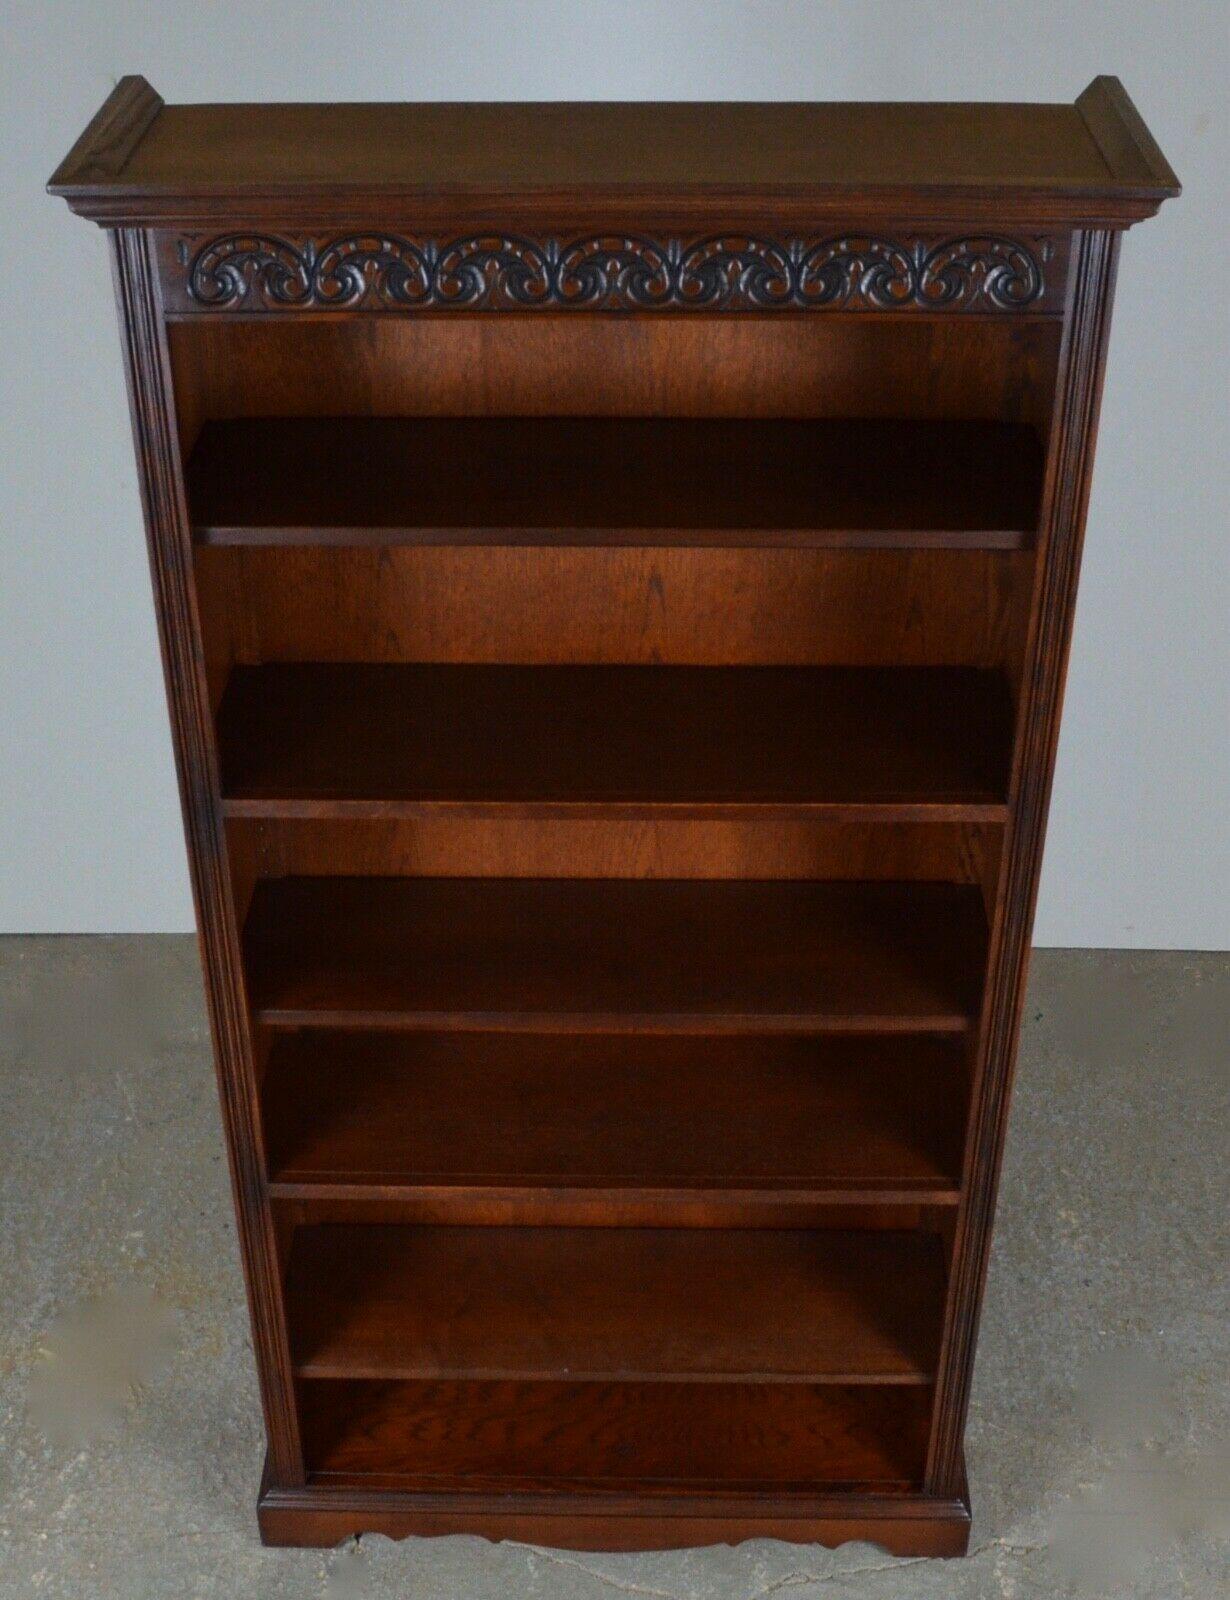 Old Charm Made in England Oak Timber Library Bookcases Adjustable Shelves 4